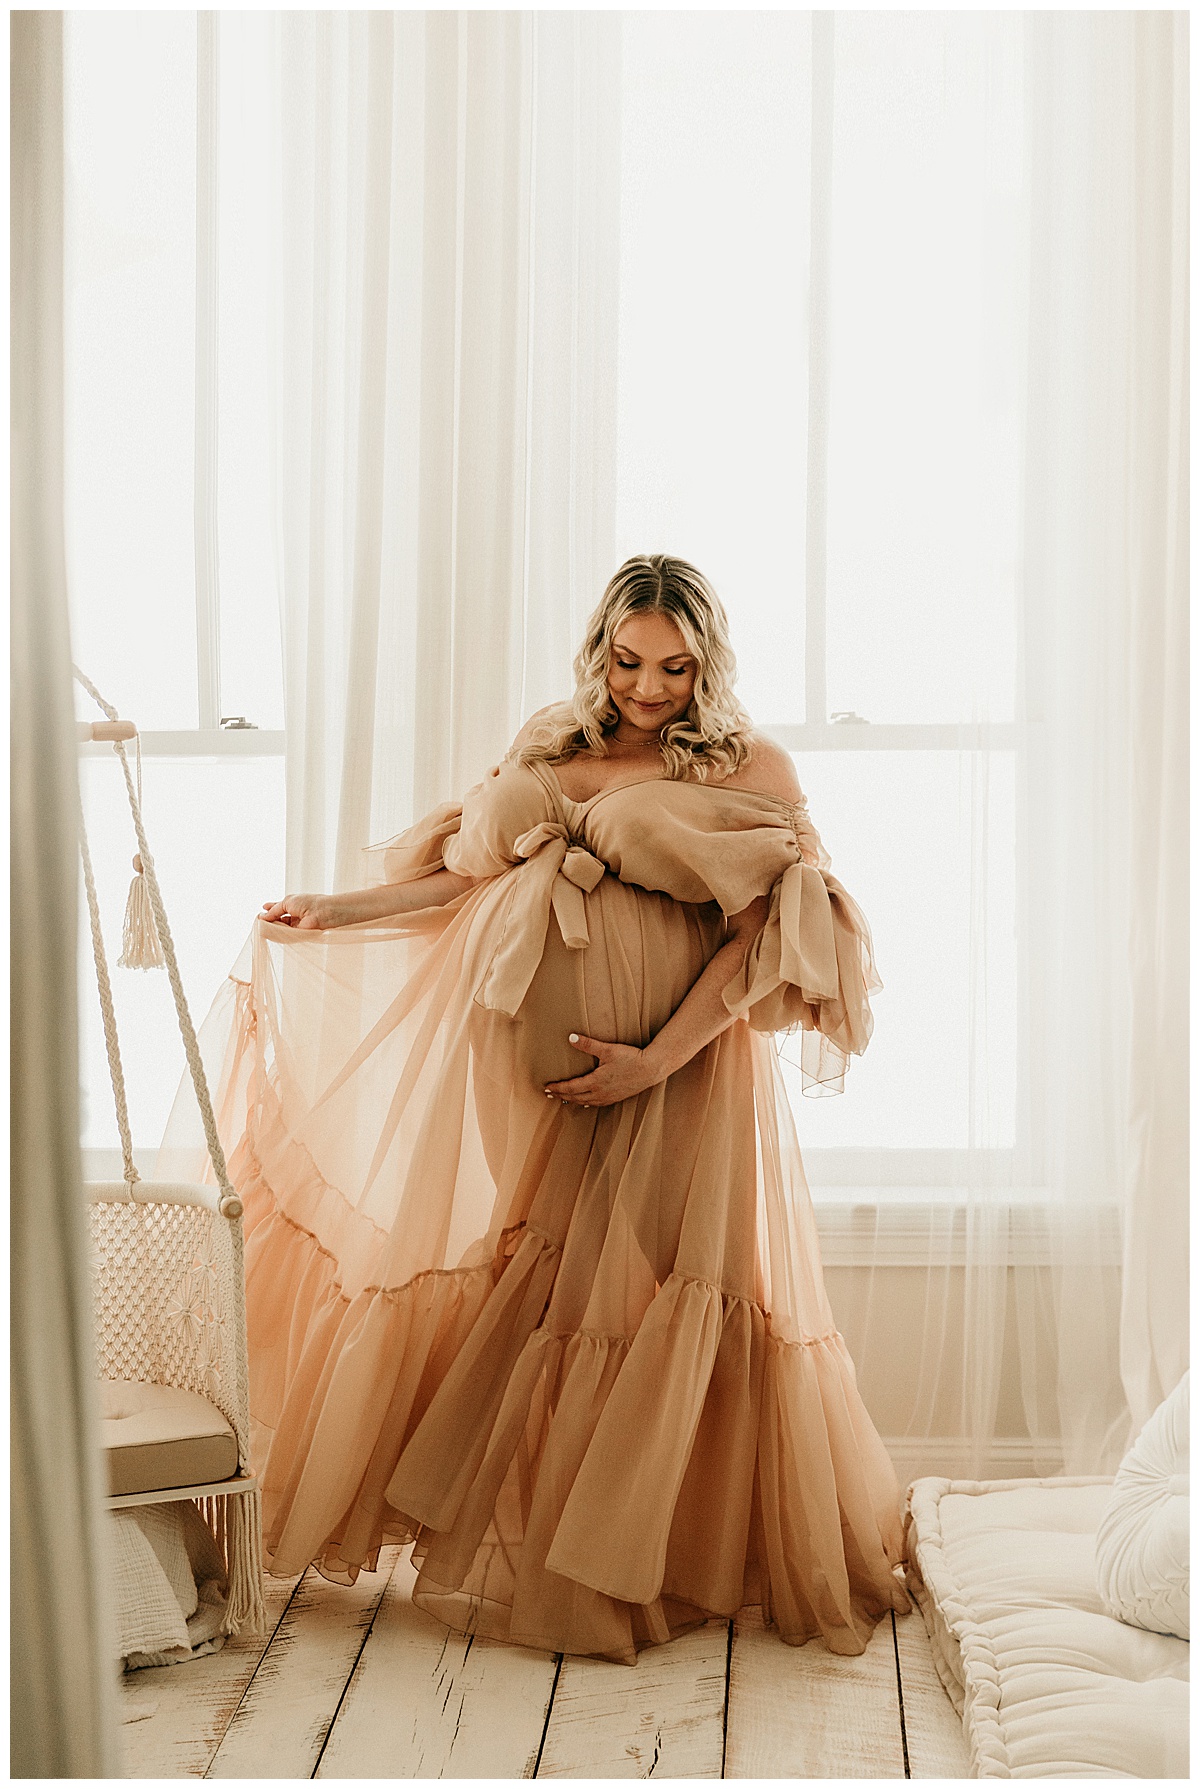 Woman twirls with dress holding pregnant belly for IVF Maternity Session.